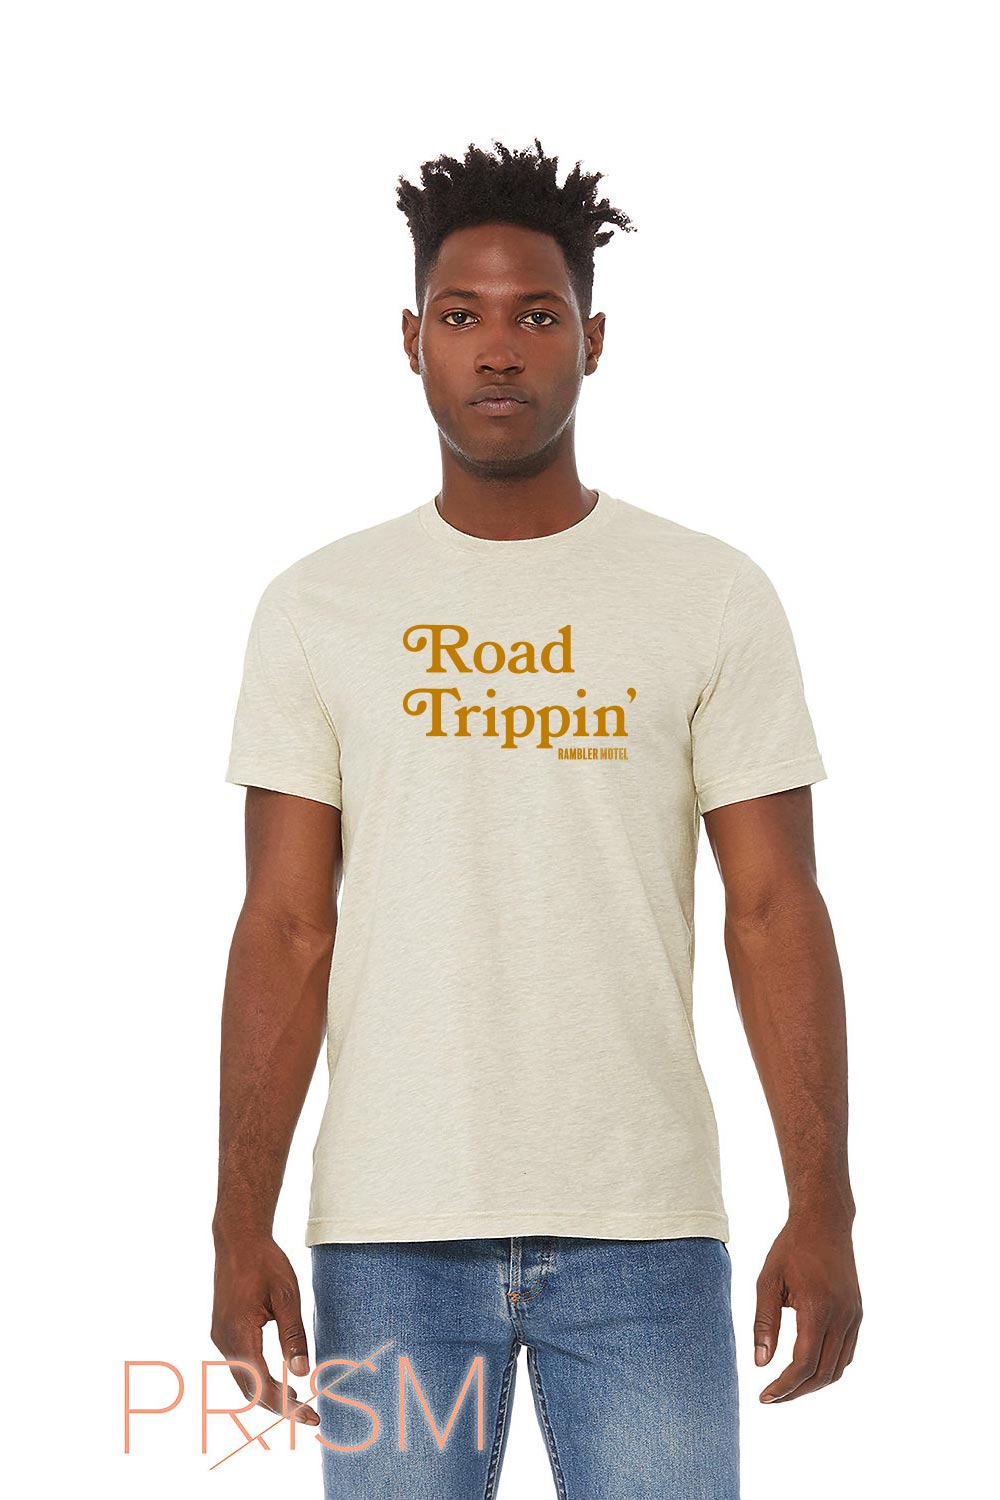 Road Trippin' T-Shirt (Heather Natural Prism)